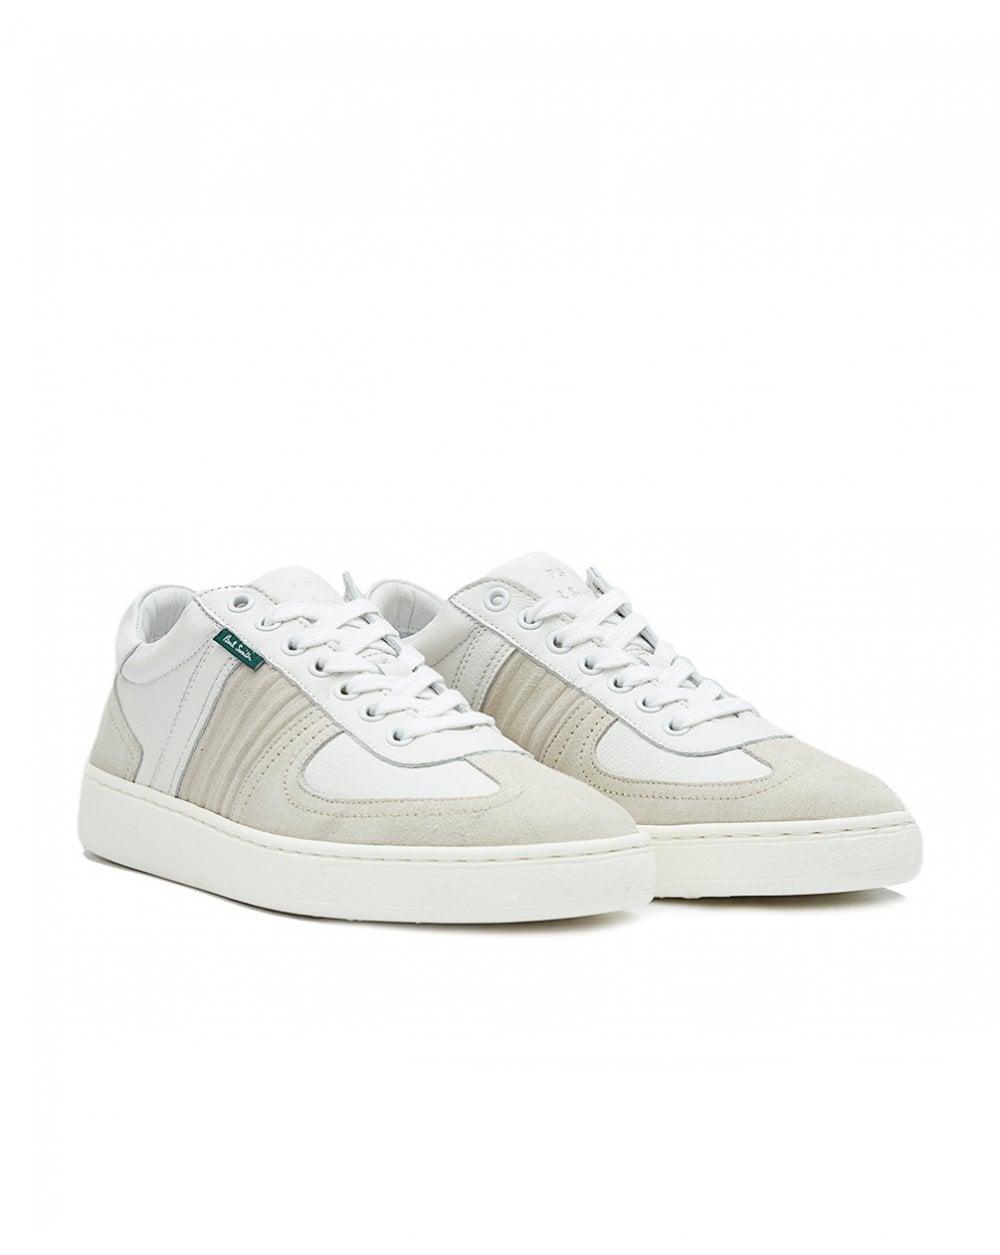 Paul Smith Reemo Top Sellers, SAVE 56%.